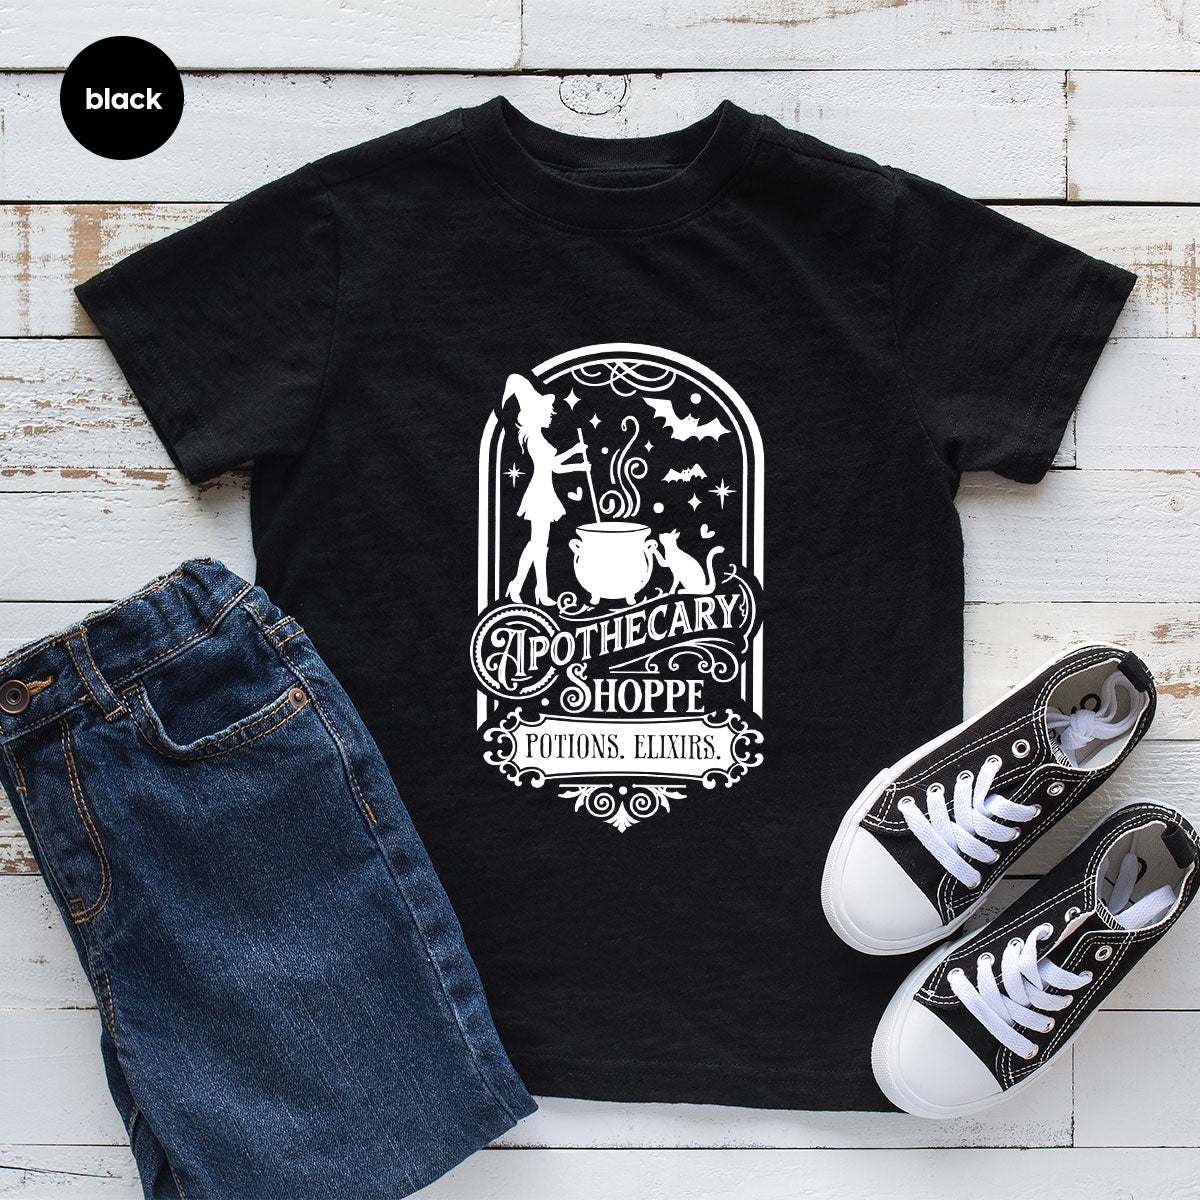 Funny Witch Shirt, Halloween Party Tshirt, Apothecary Shoppe Clothing, Halloween Tshirts, Witchy T-Shirt, Shirts for Women, Gift For Her